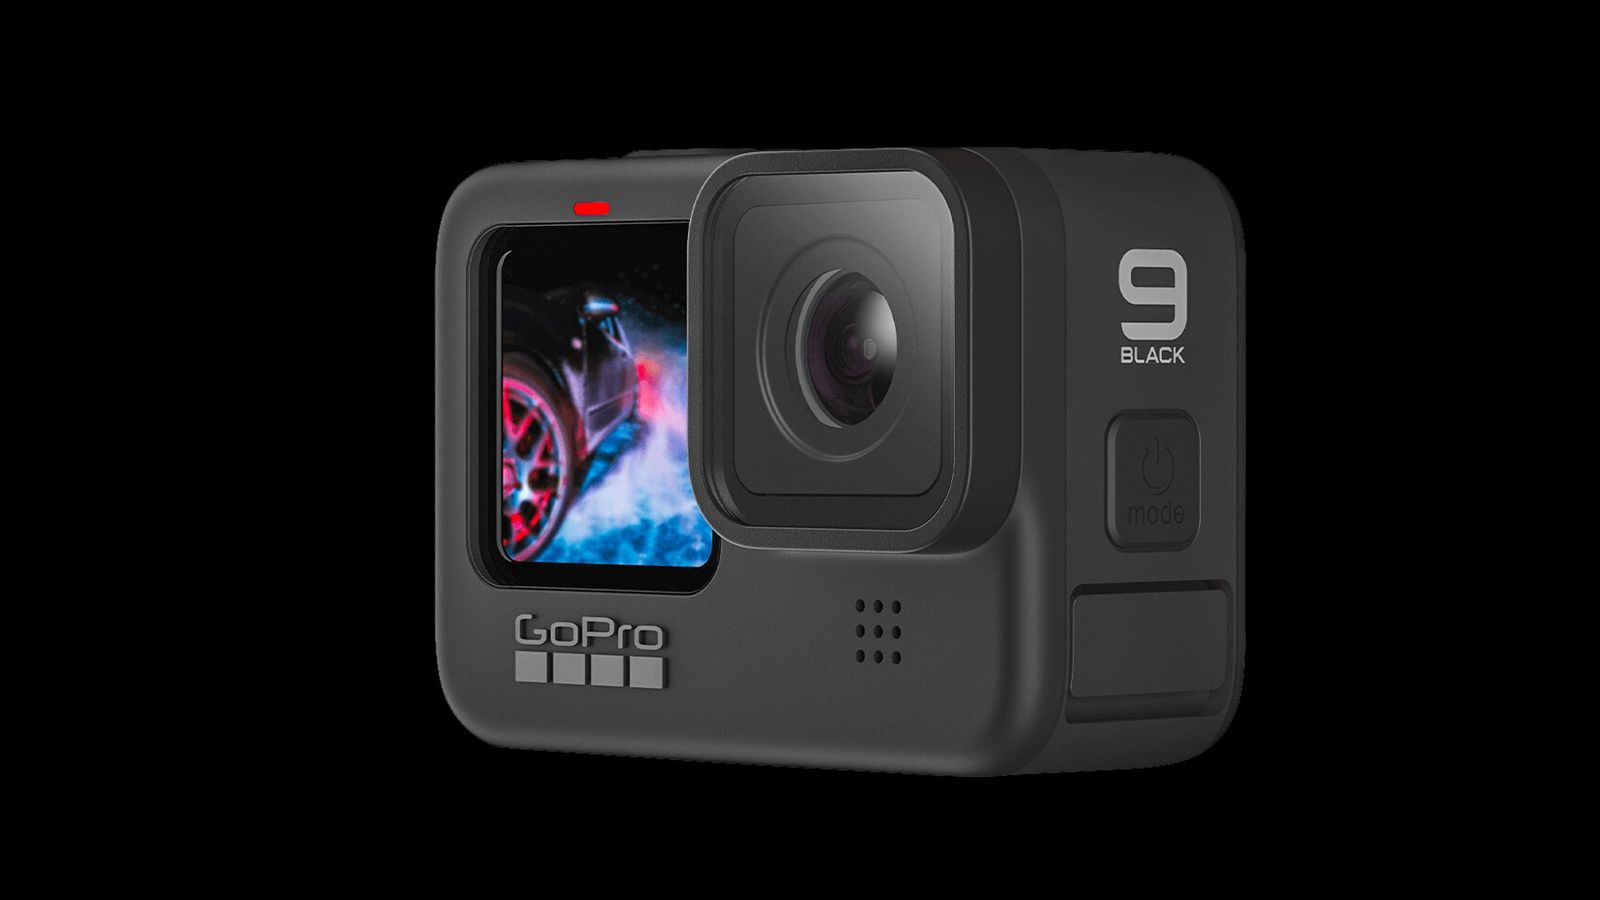 Best GoPro HERO9 product image of a black camera with a 9 Black logo on the side in grey.